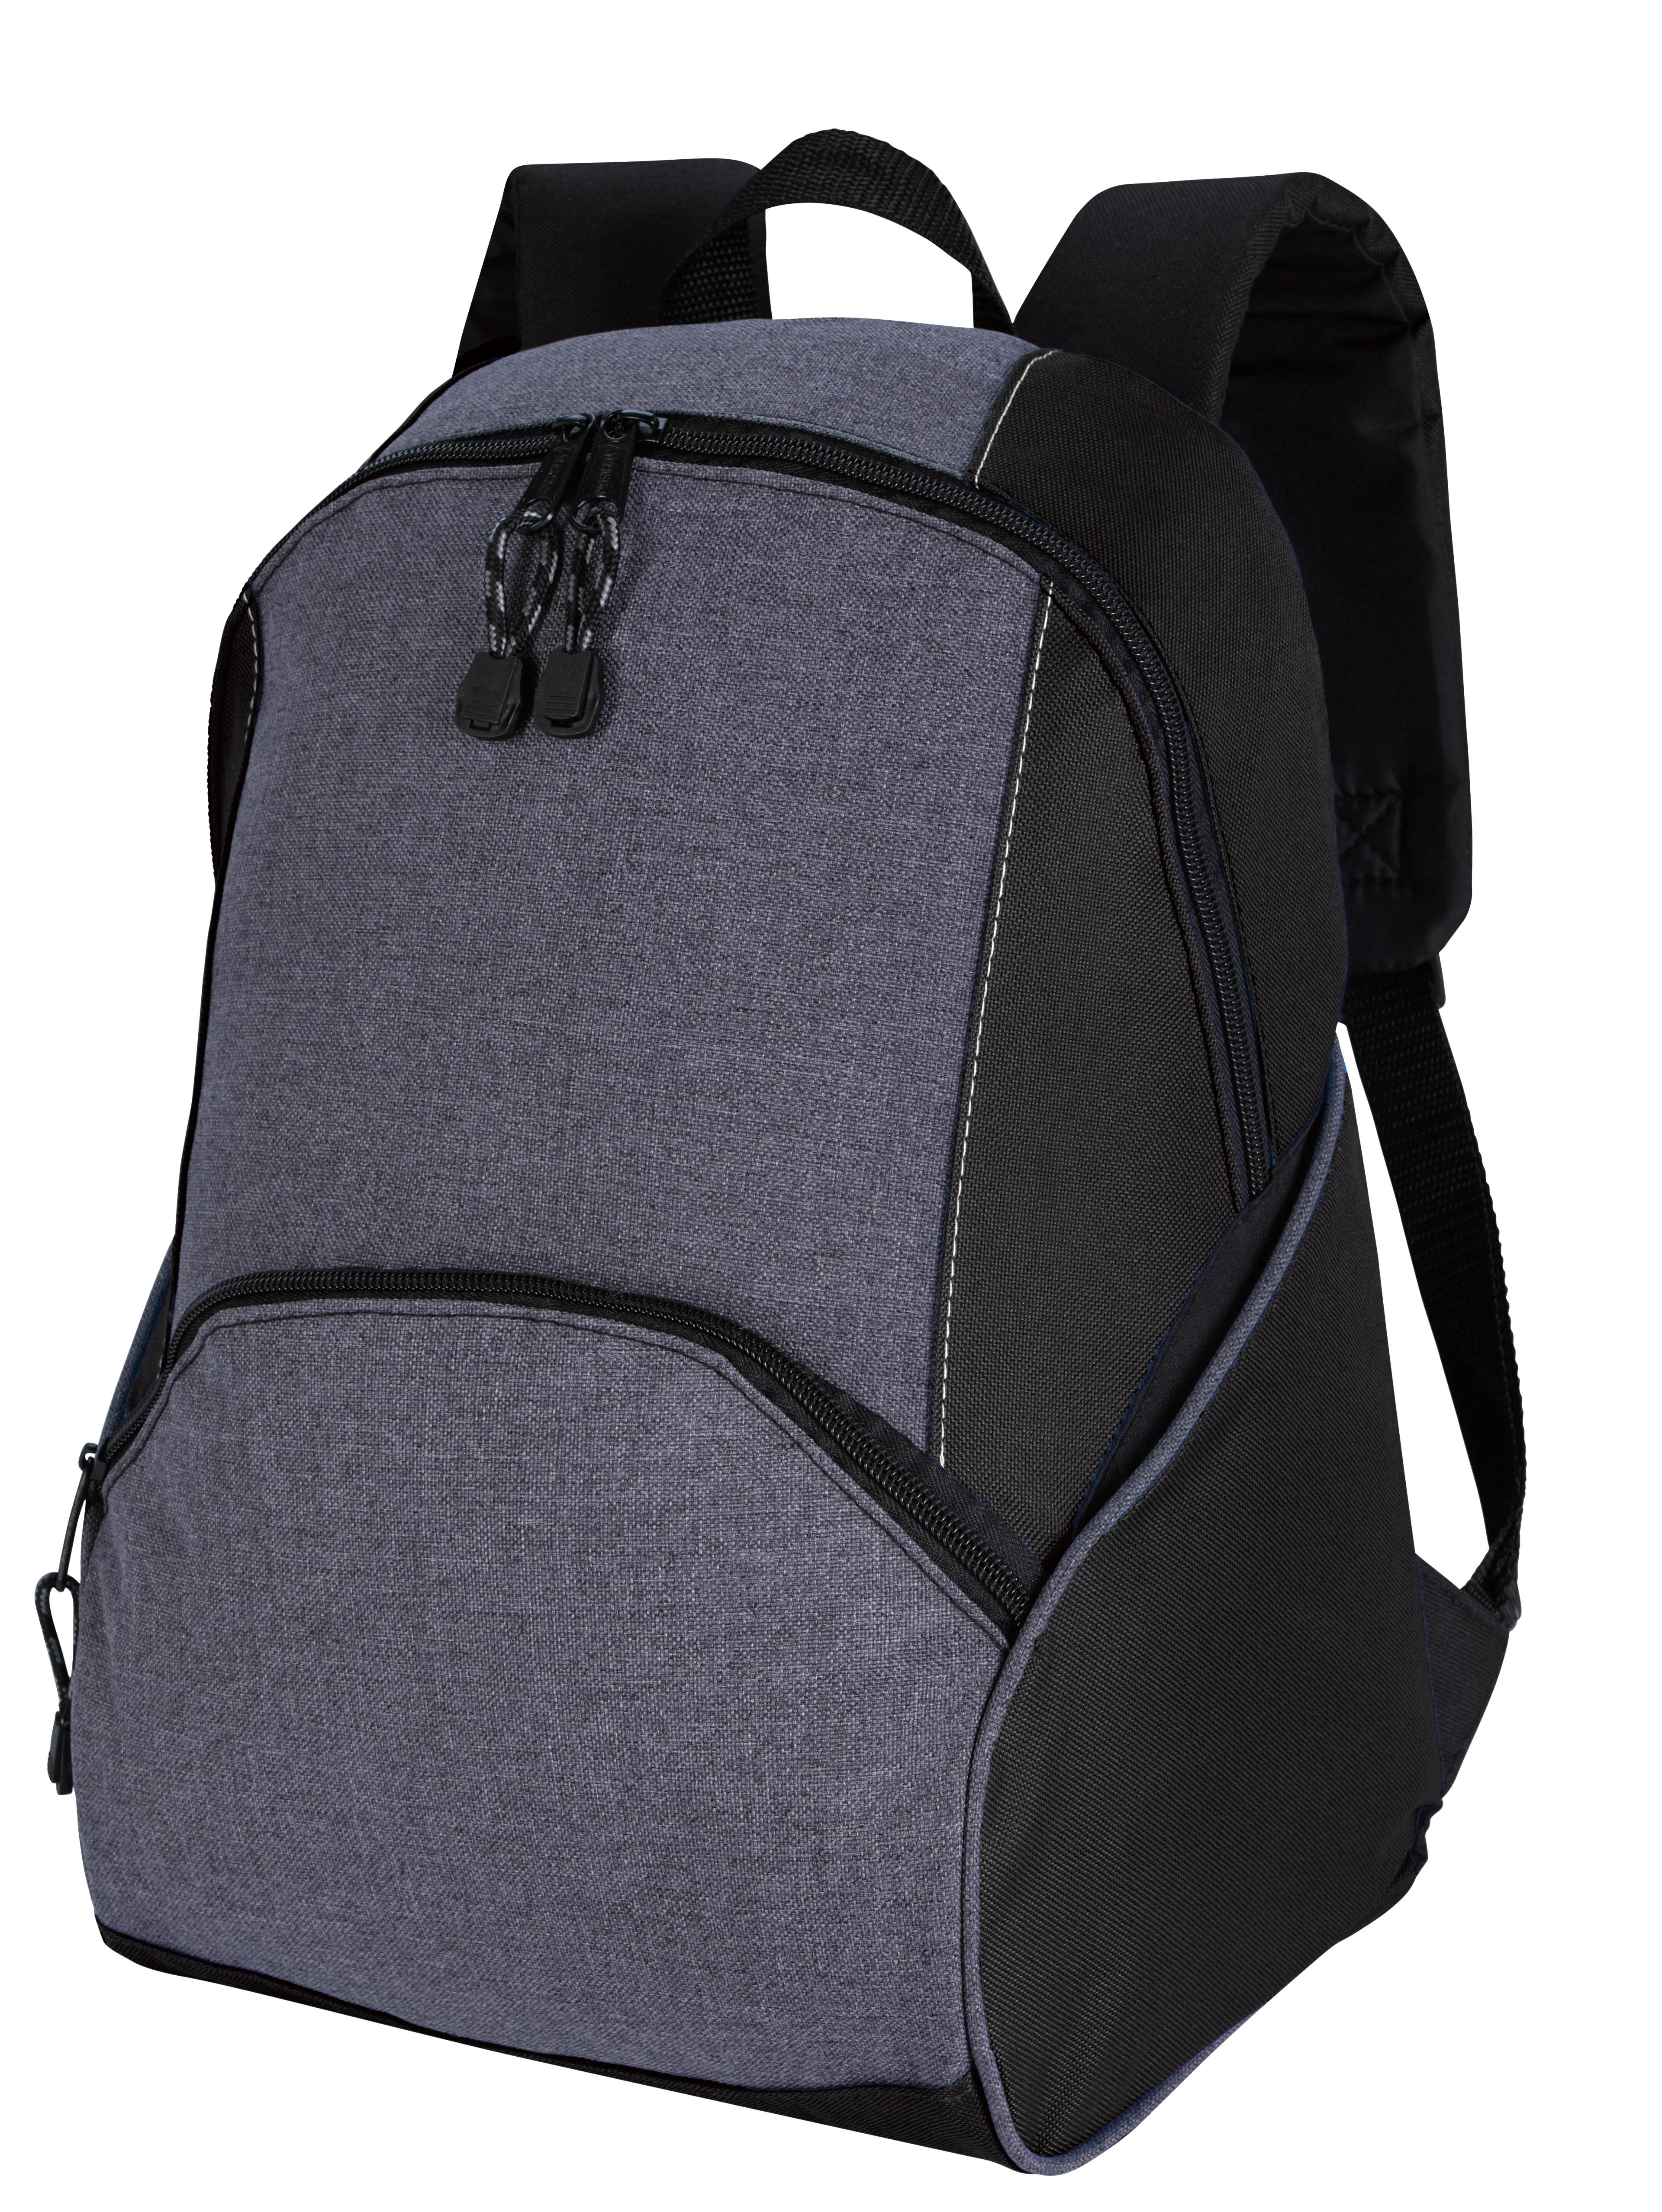 Two-Tone On the Move Backpack 5 of 25